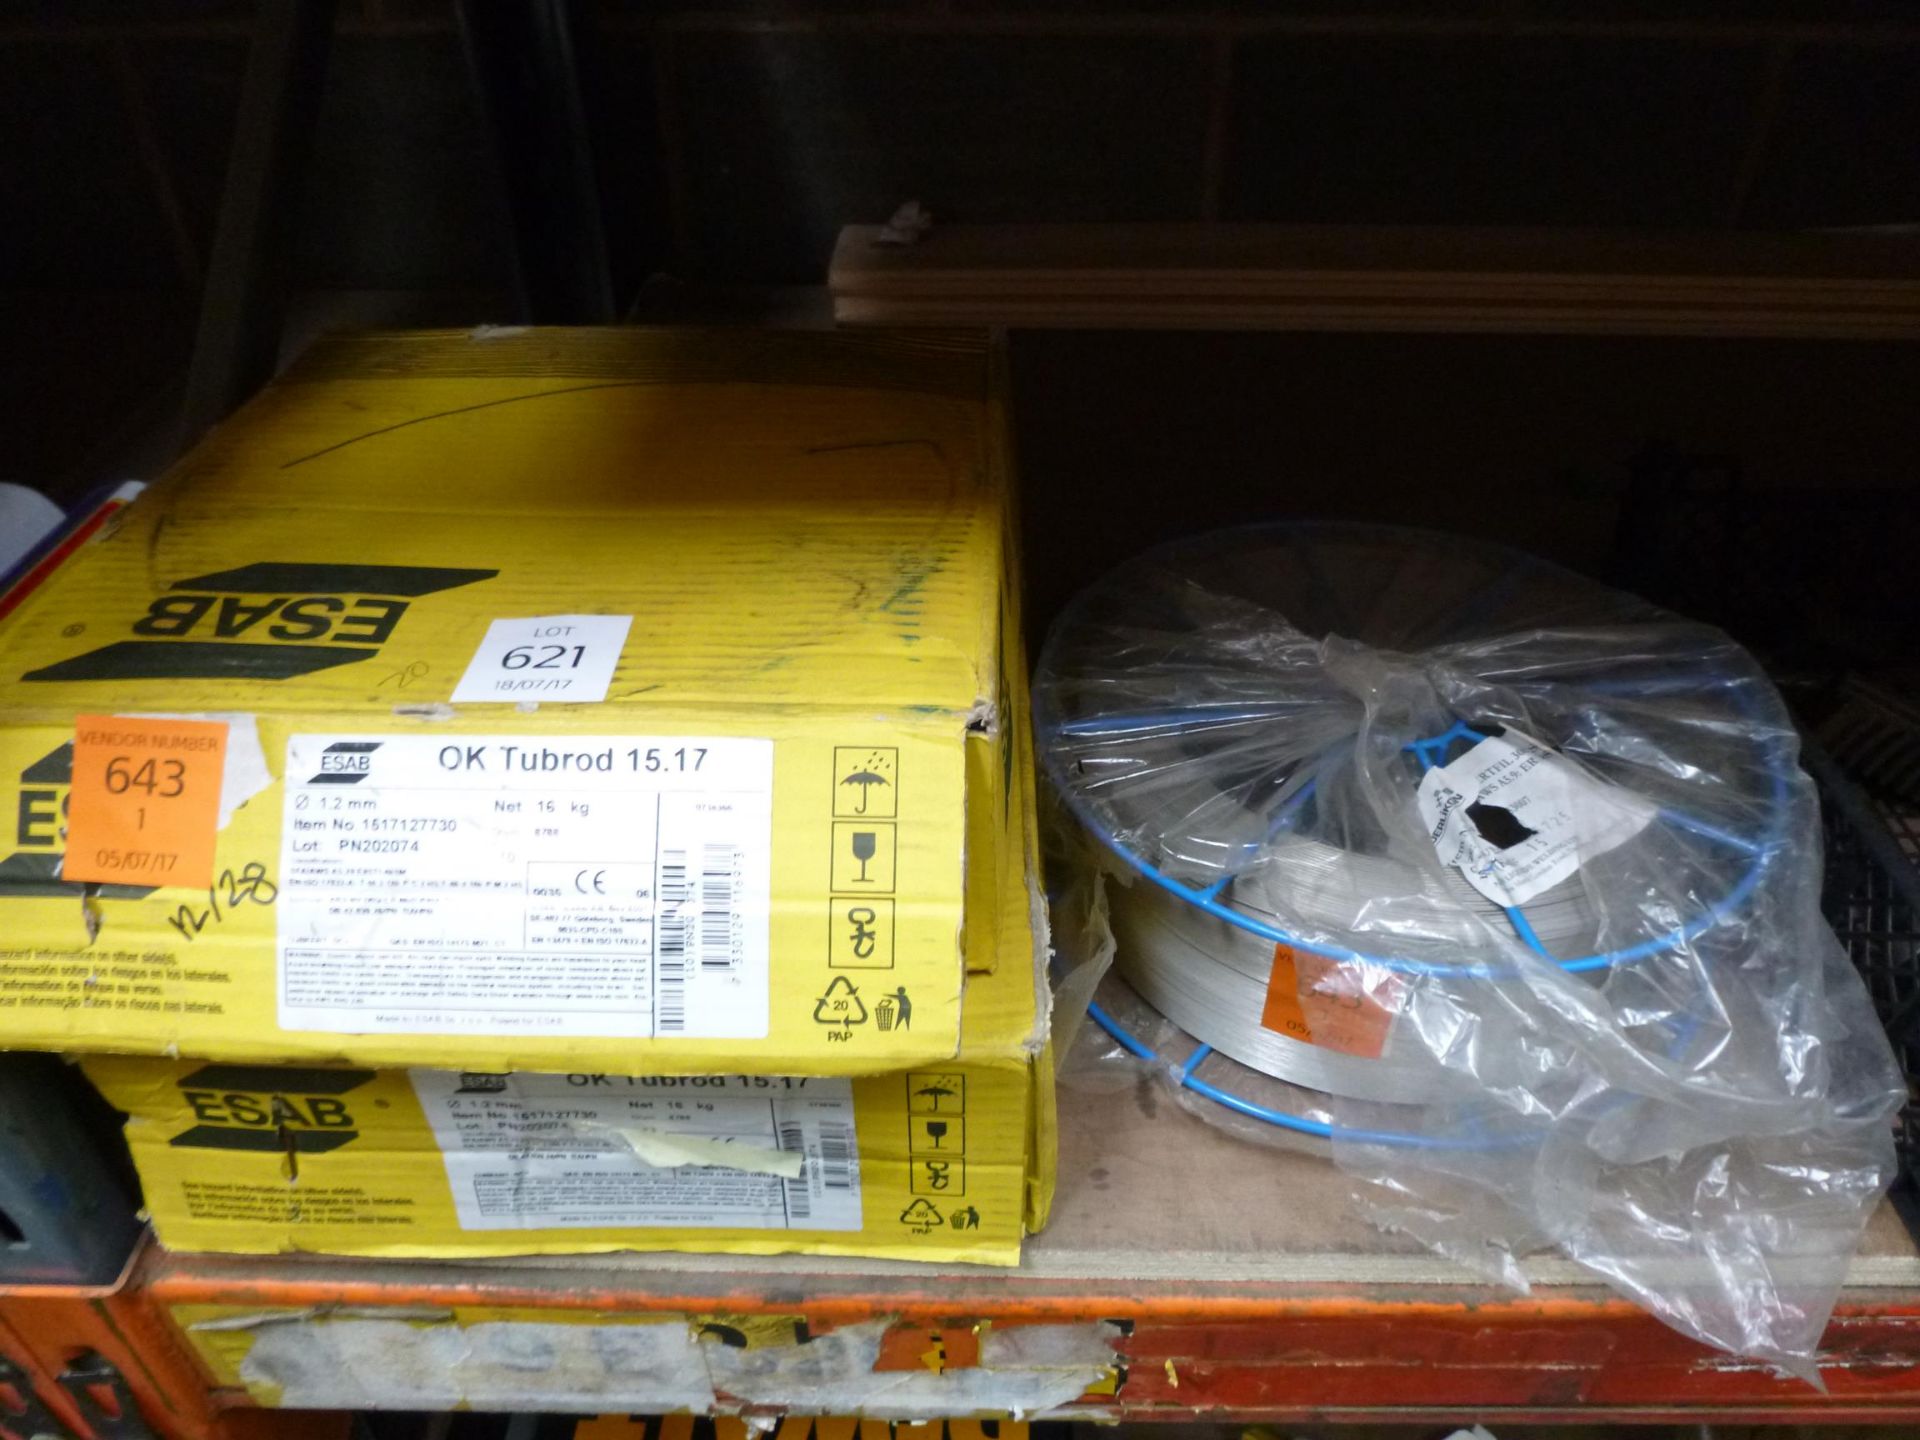 2 x Boxes of ESAB Welding Wire and another